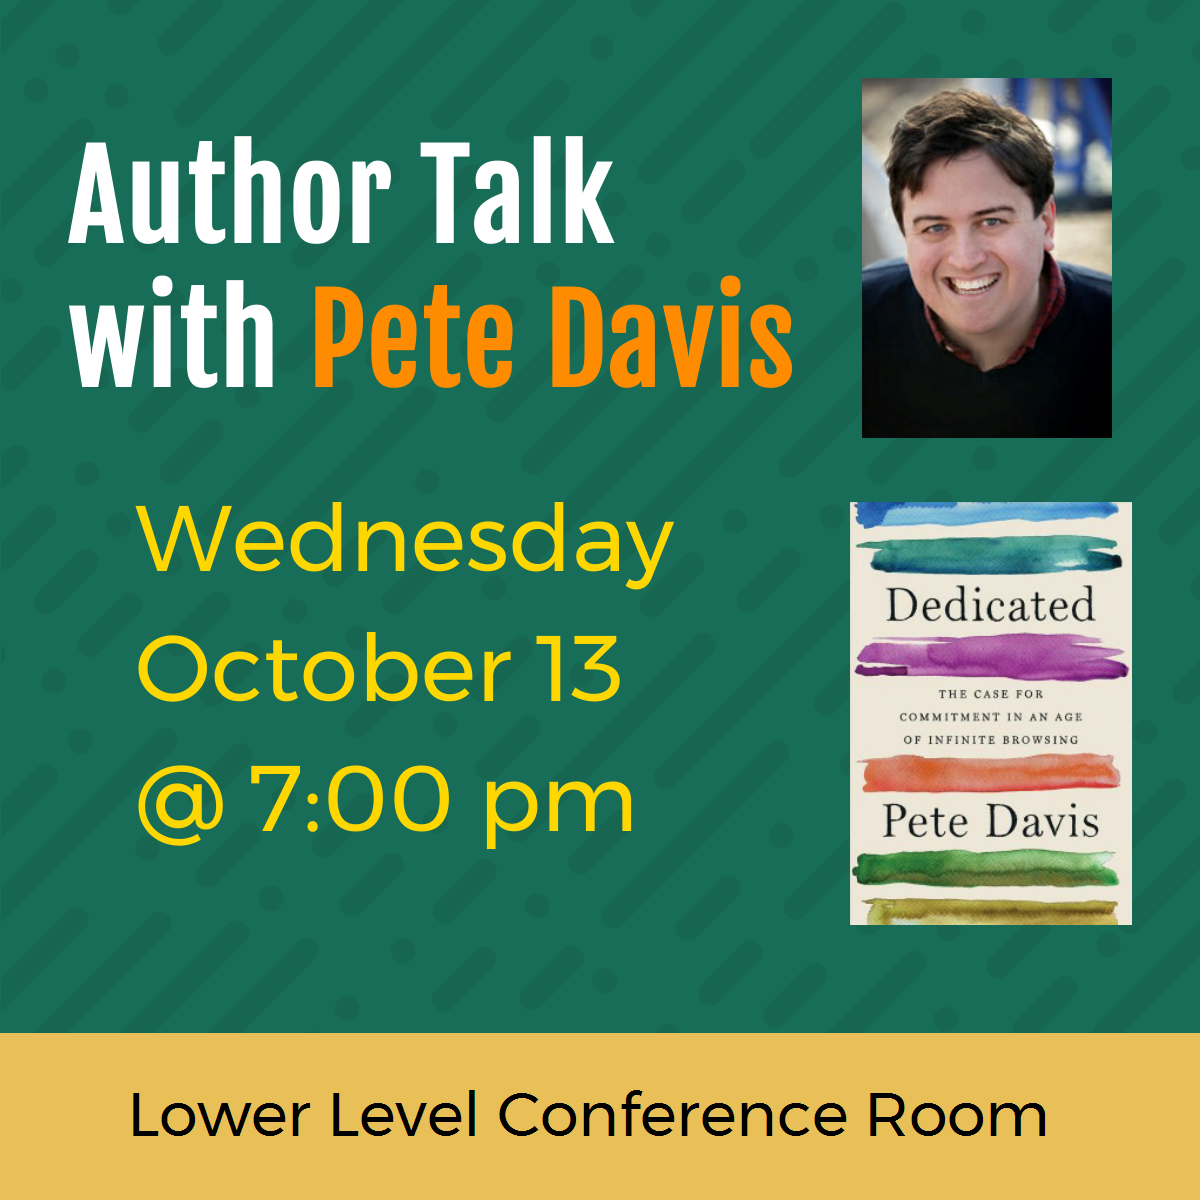 Author Talk with Pete Davis Wednesday October 13 at 7 pm